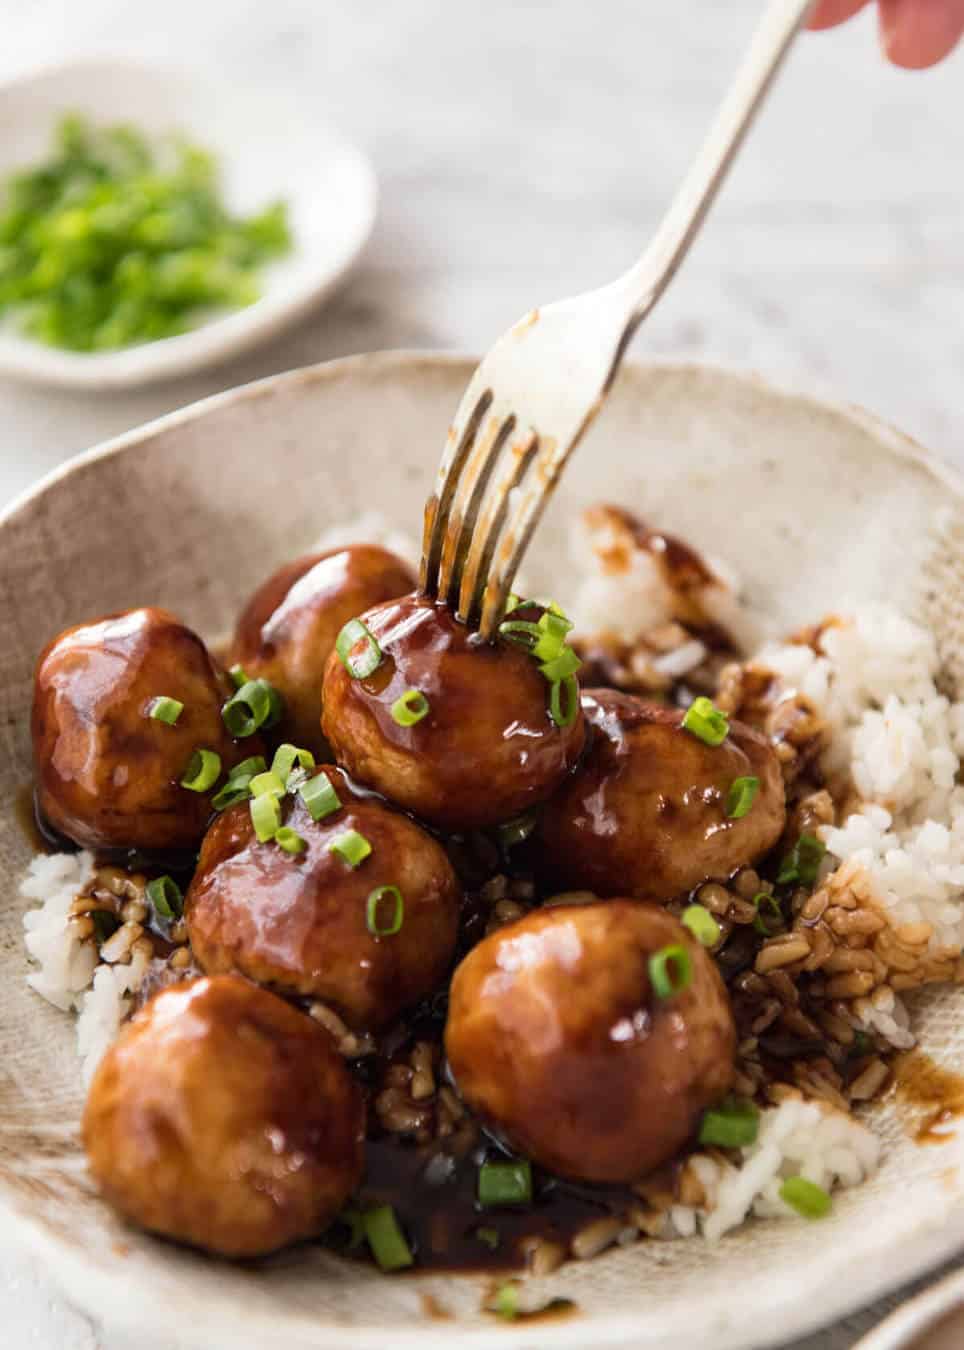 If you love juicy, plump chicken meatballs and Teriyaki sauce, you will go mad over these Teriyaki Chicken Meatballs! recipetineats.com